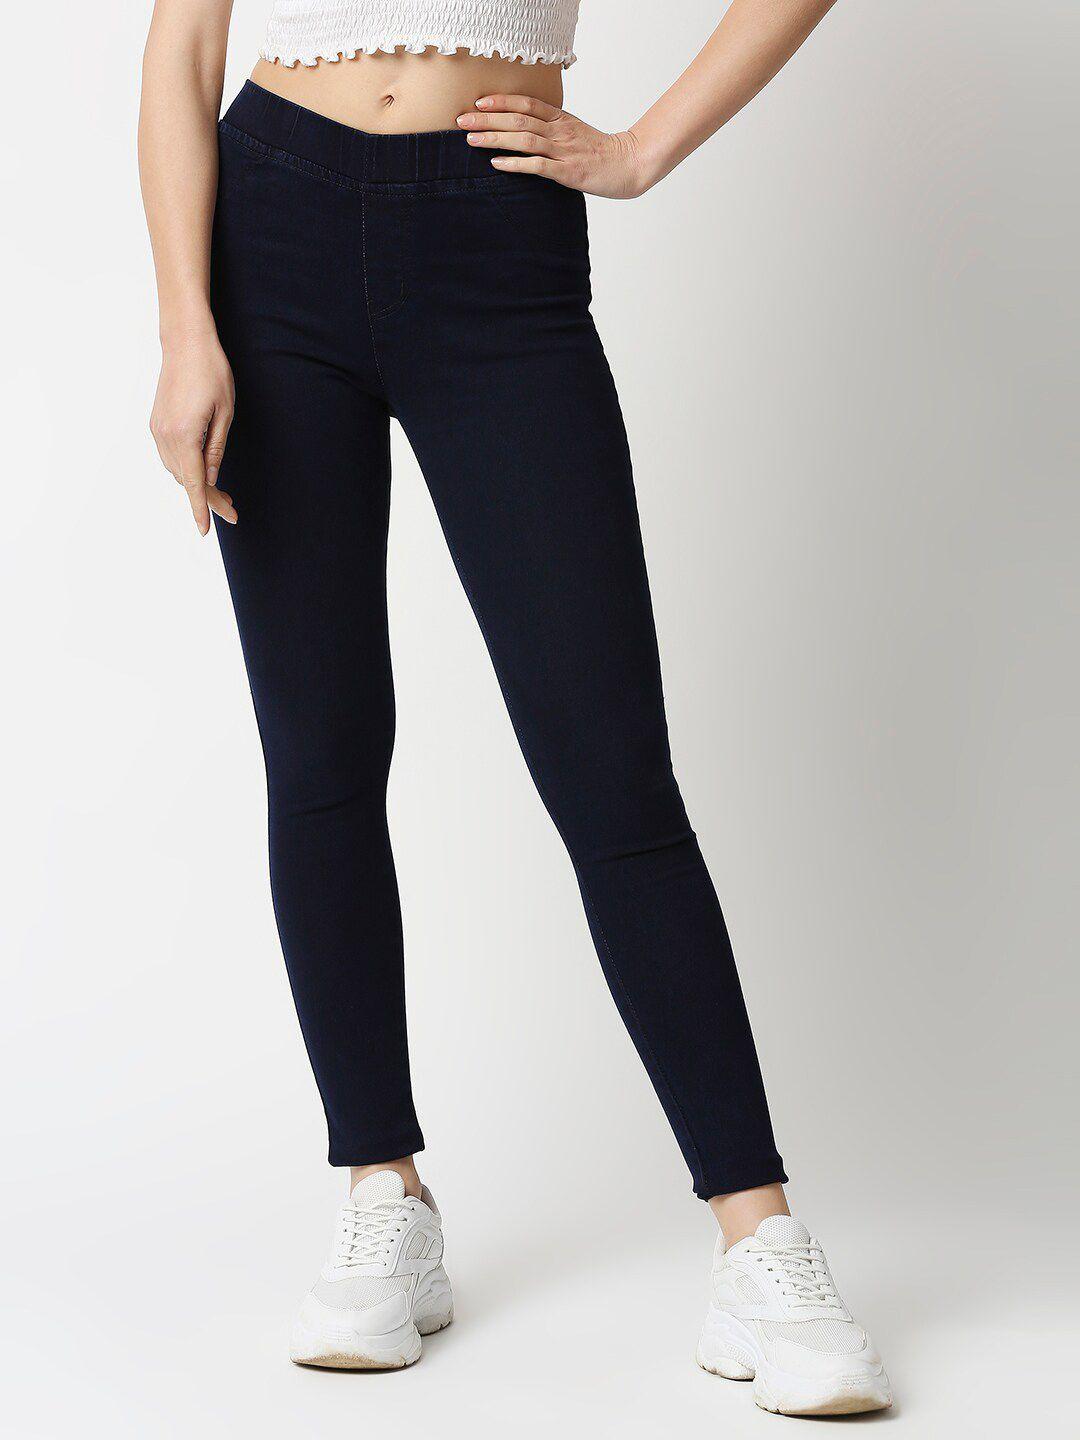 high-star-women-navy-blue-solid-jeggings